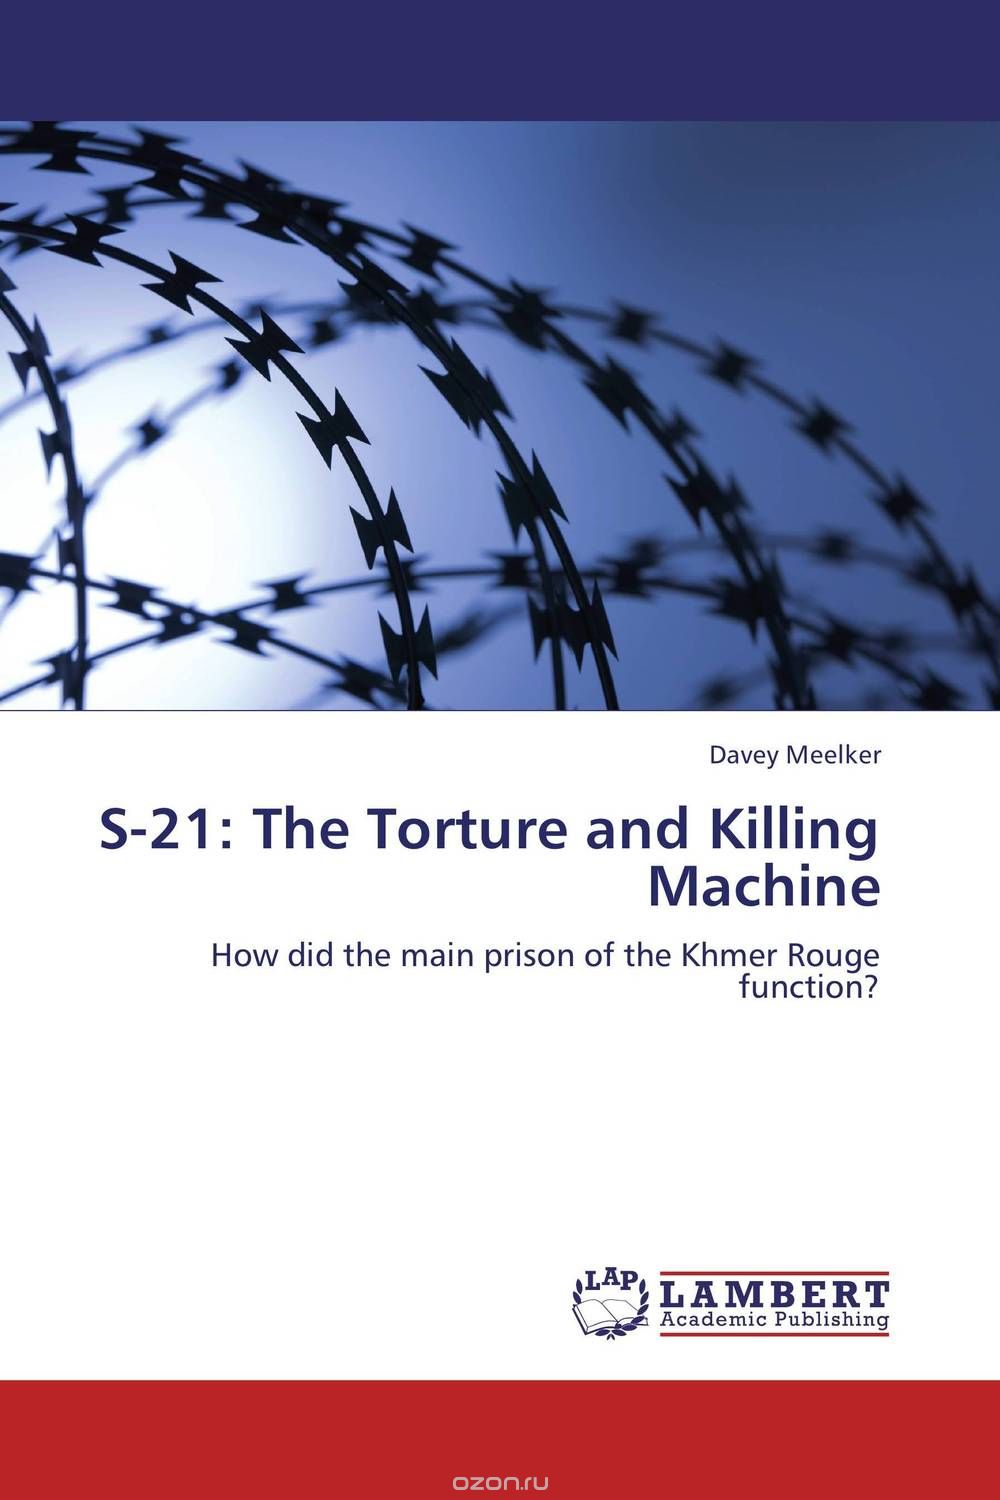 S-21: The Torture and Killing Machine